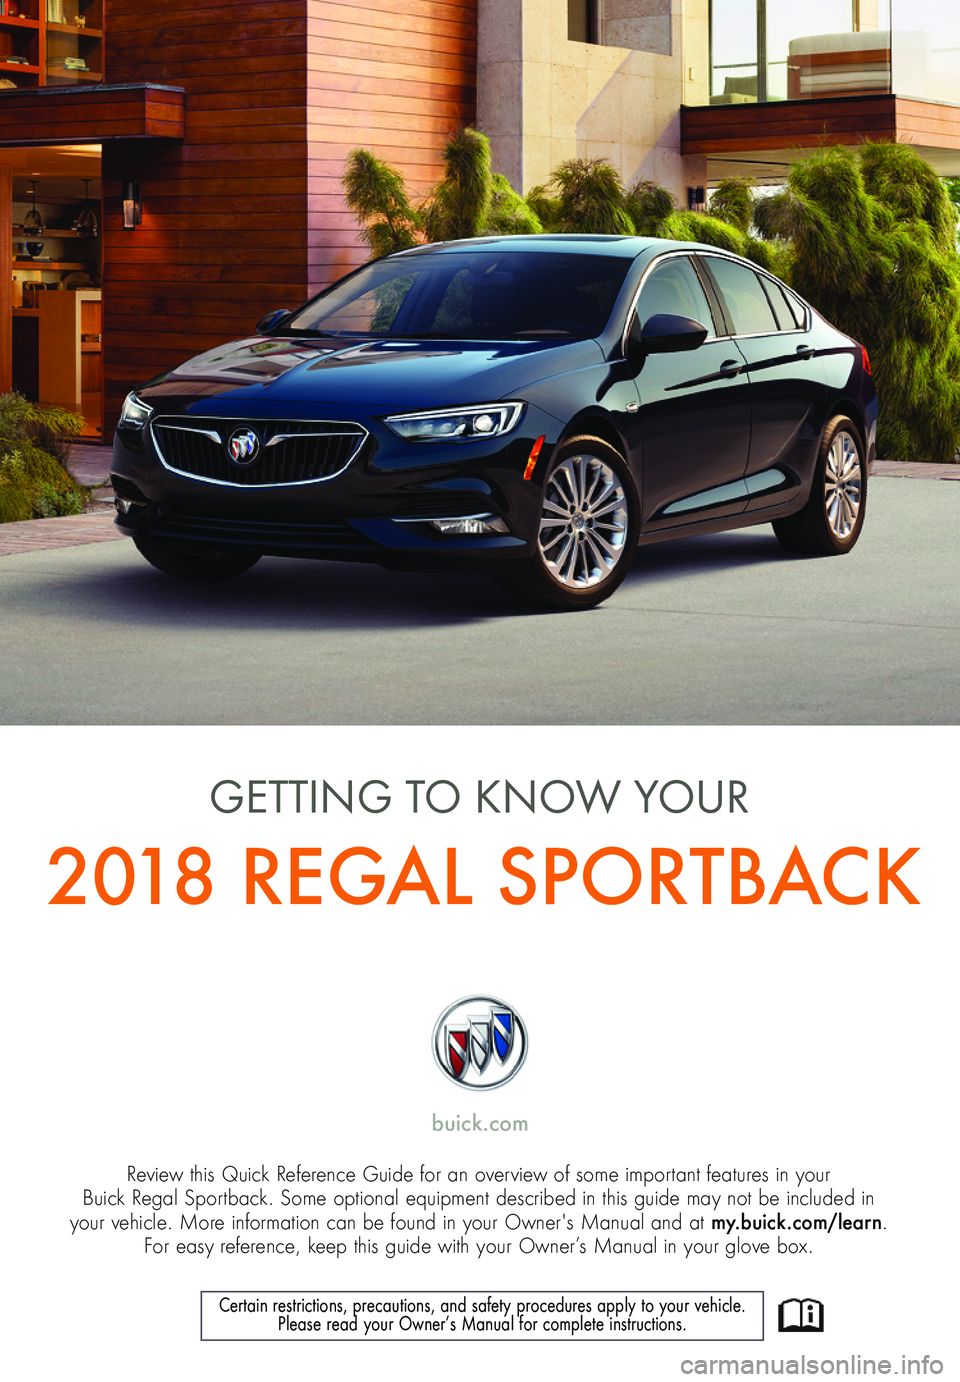 BUICK REGAL SPORTBACK 2018  Get To Know Guide 1
Review this Quick Reference Guide for an overview of some important features in your  Buick Regal Sportback. Some optional equipment described in this guide may not be included in  your vehicle. Mor